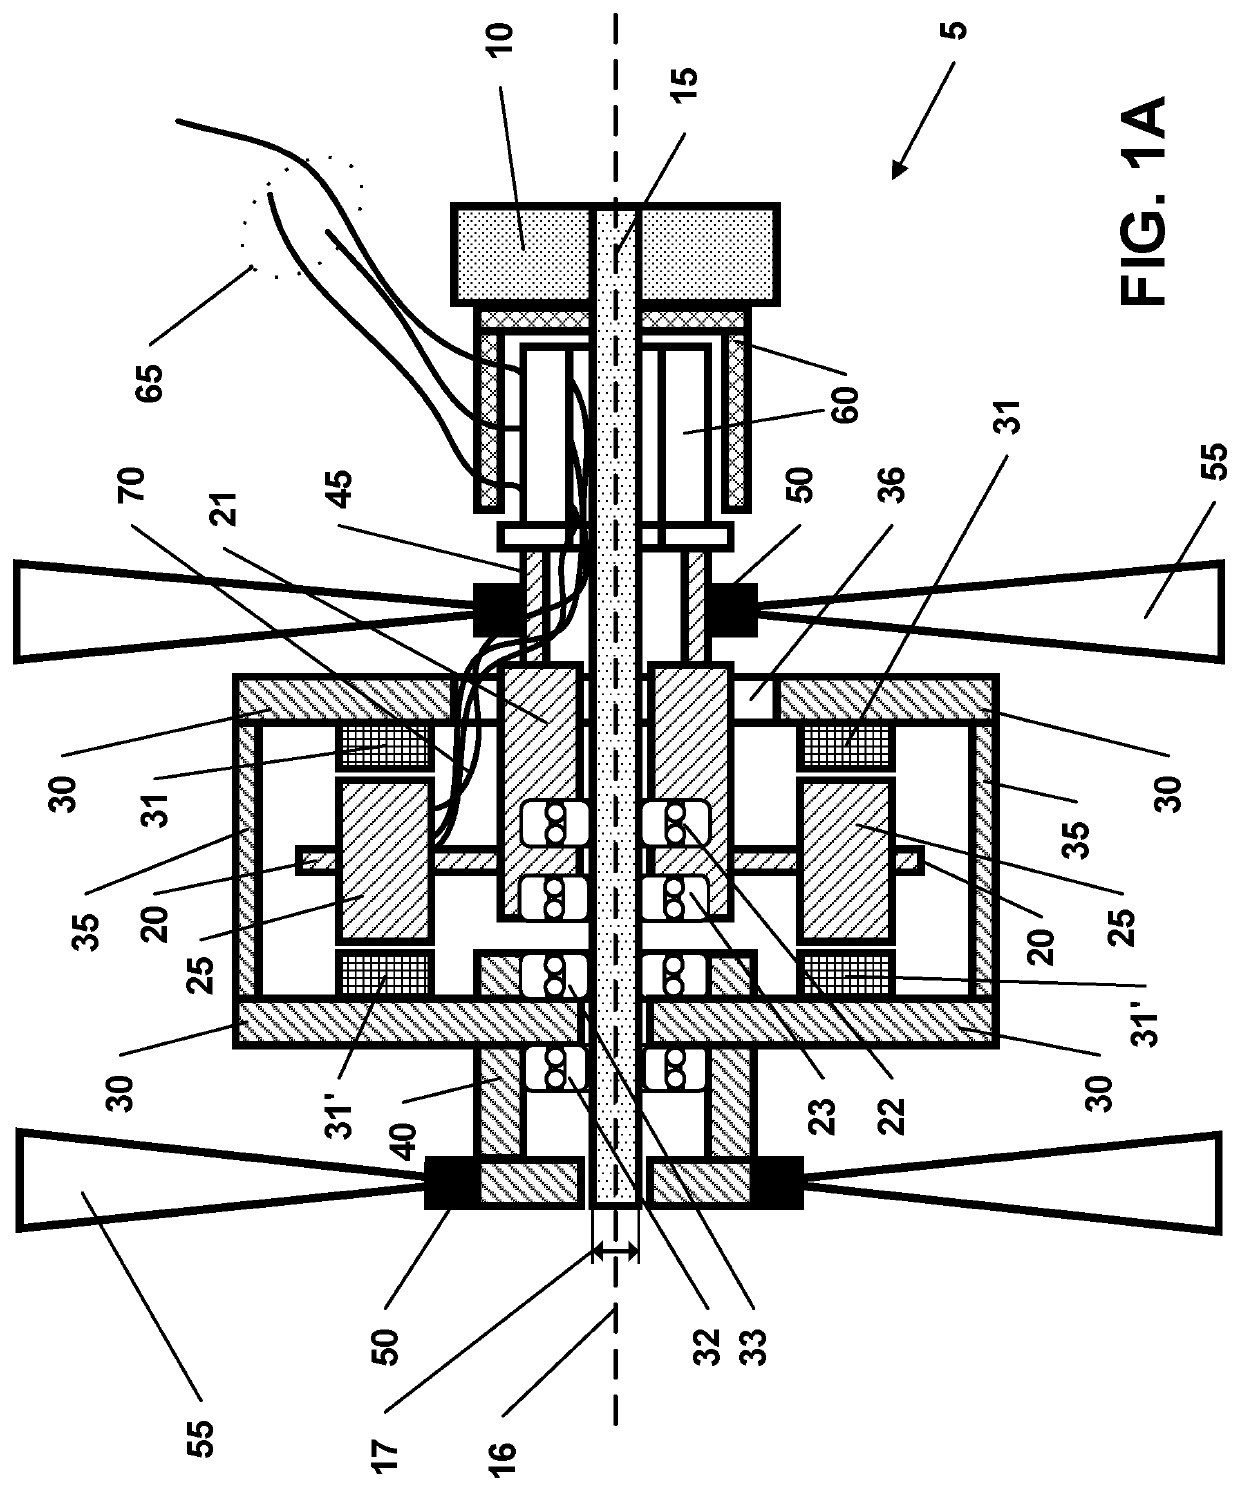 Counter-rotating axial electric motor assembly